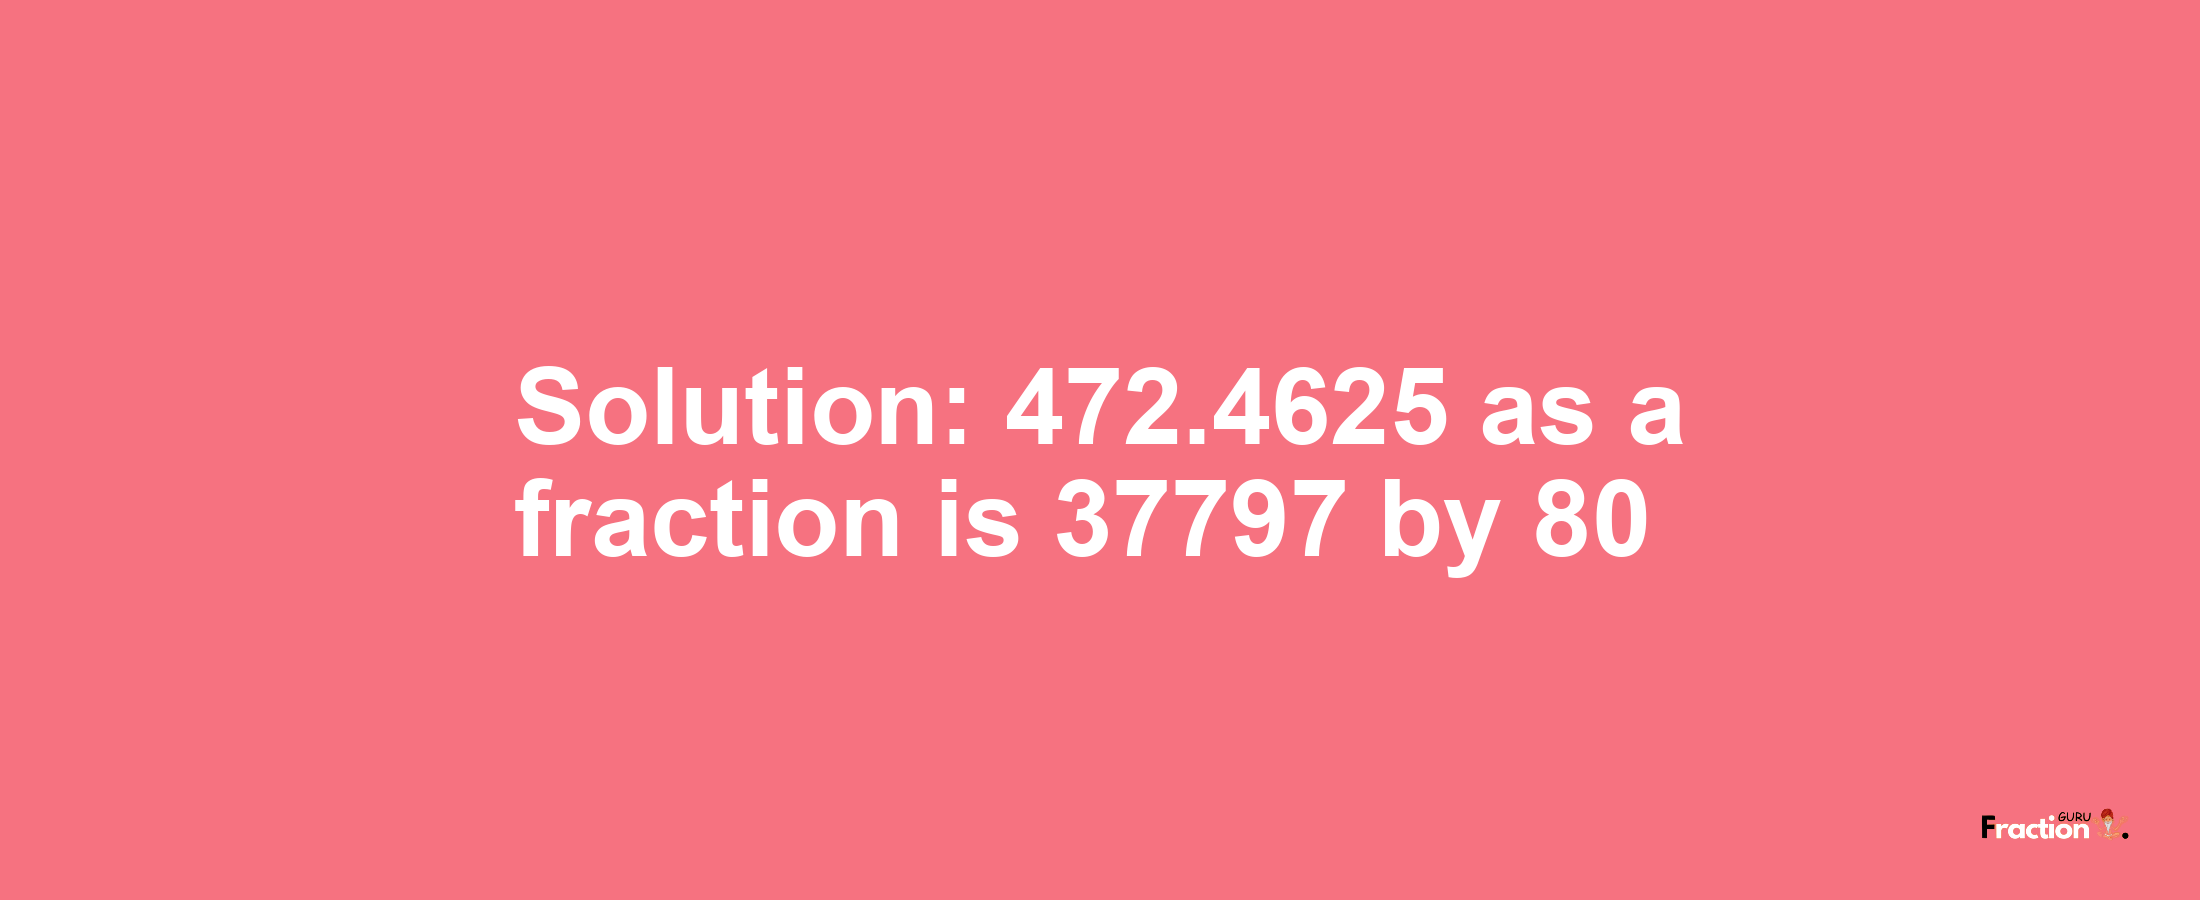 Solution:472.4625 as a fraction is 37797/80